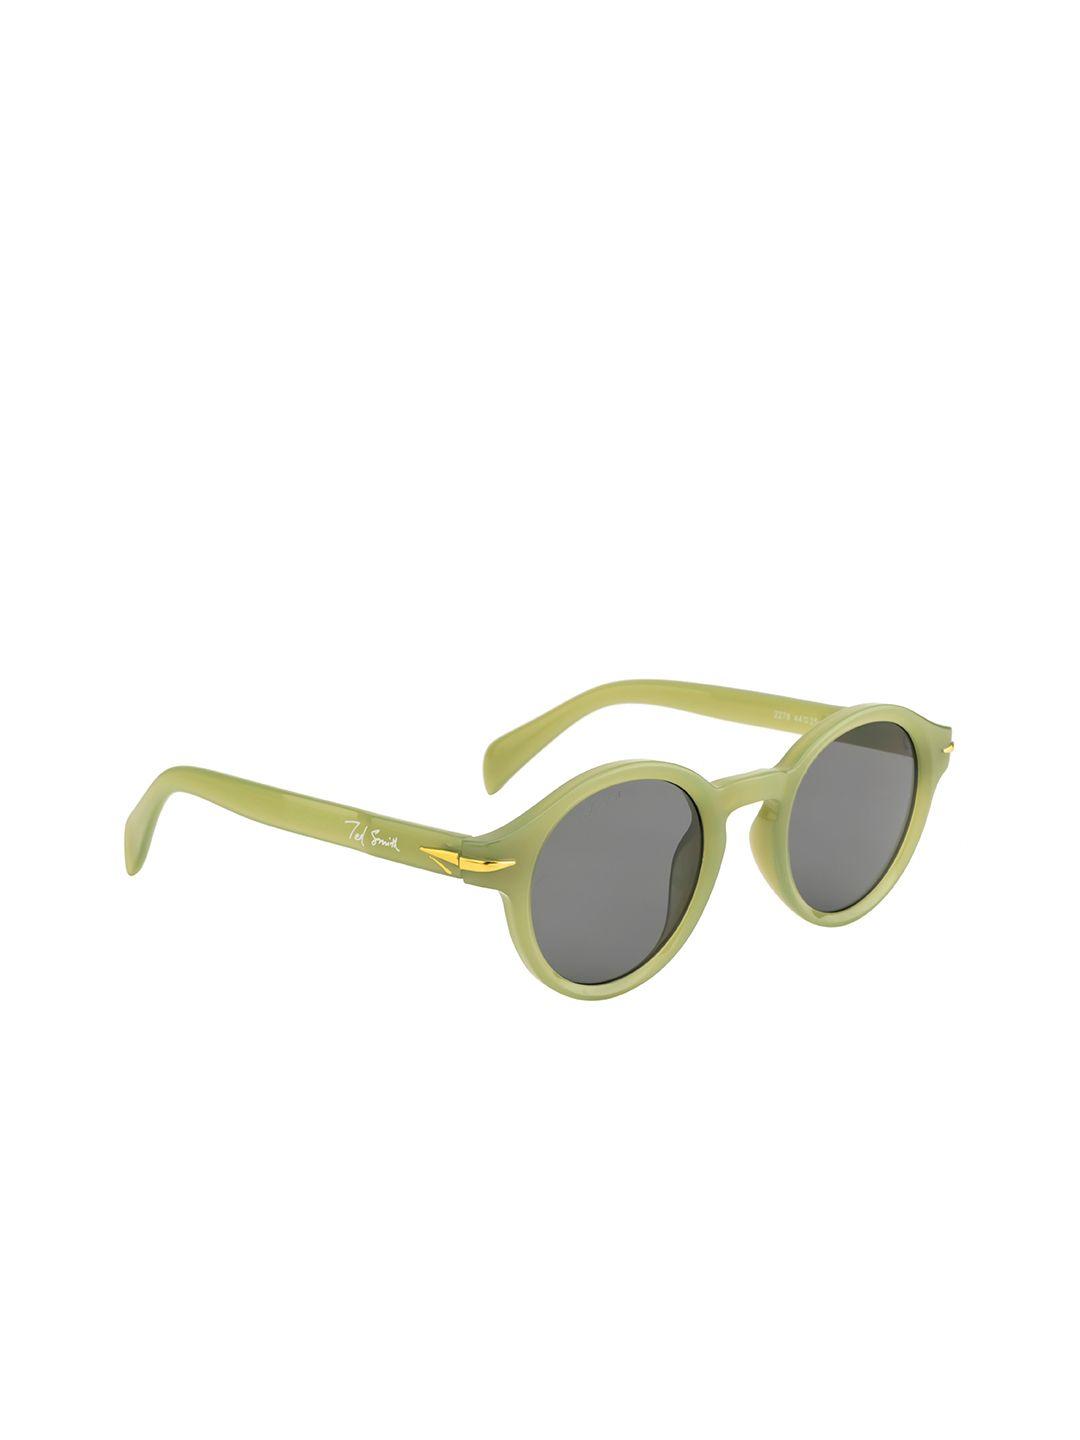 Ted Smith Unisex Grey Lens & Green Round Sunglasses with UV Protected Lens